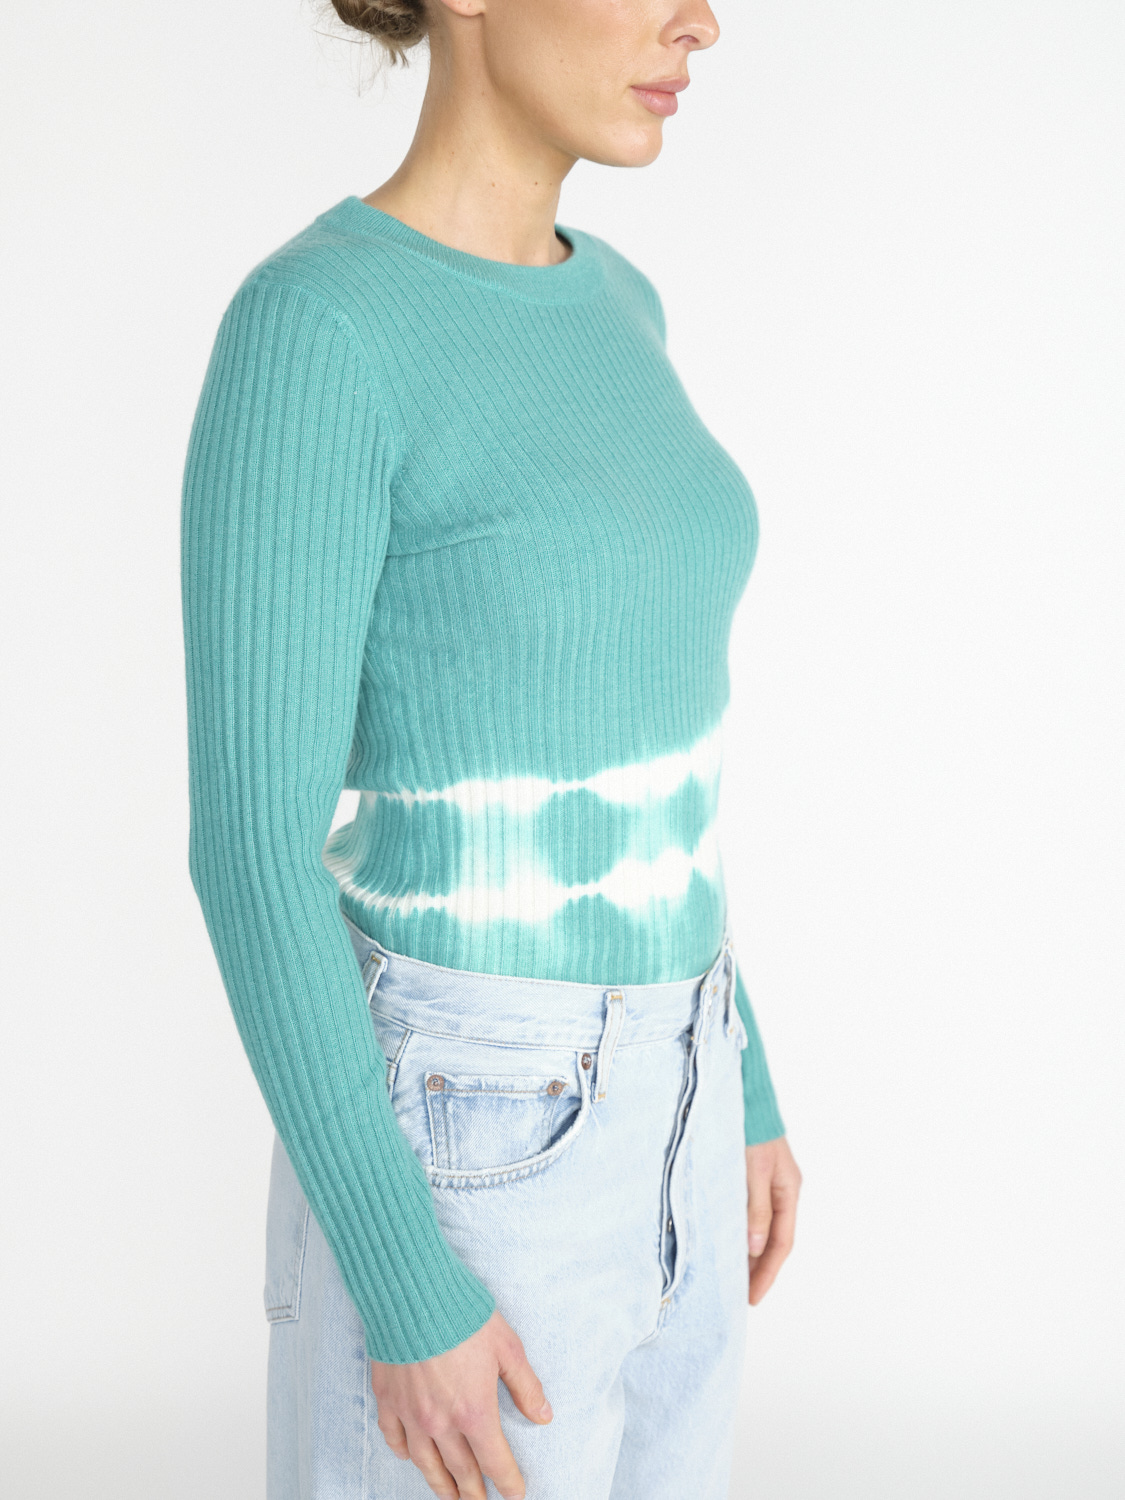 Kujten Bibi ribbed cashmere sweater with tie-dye details  mint S/M